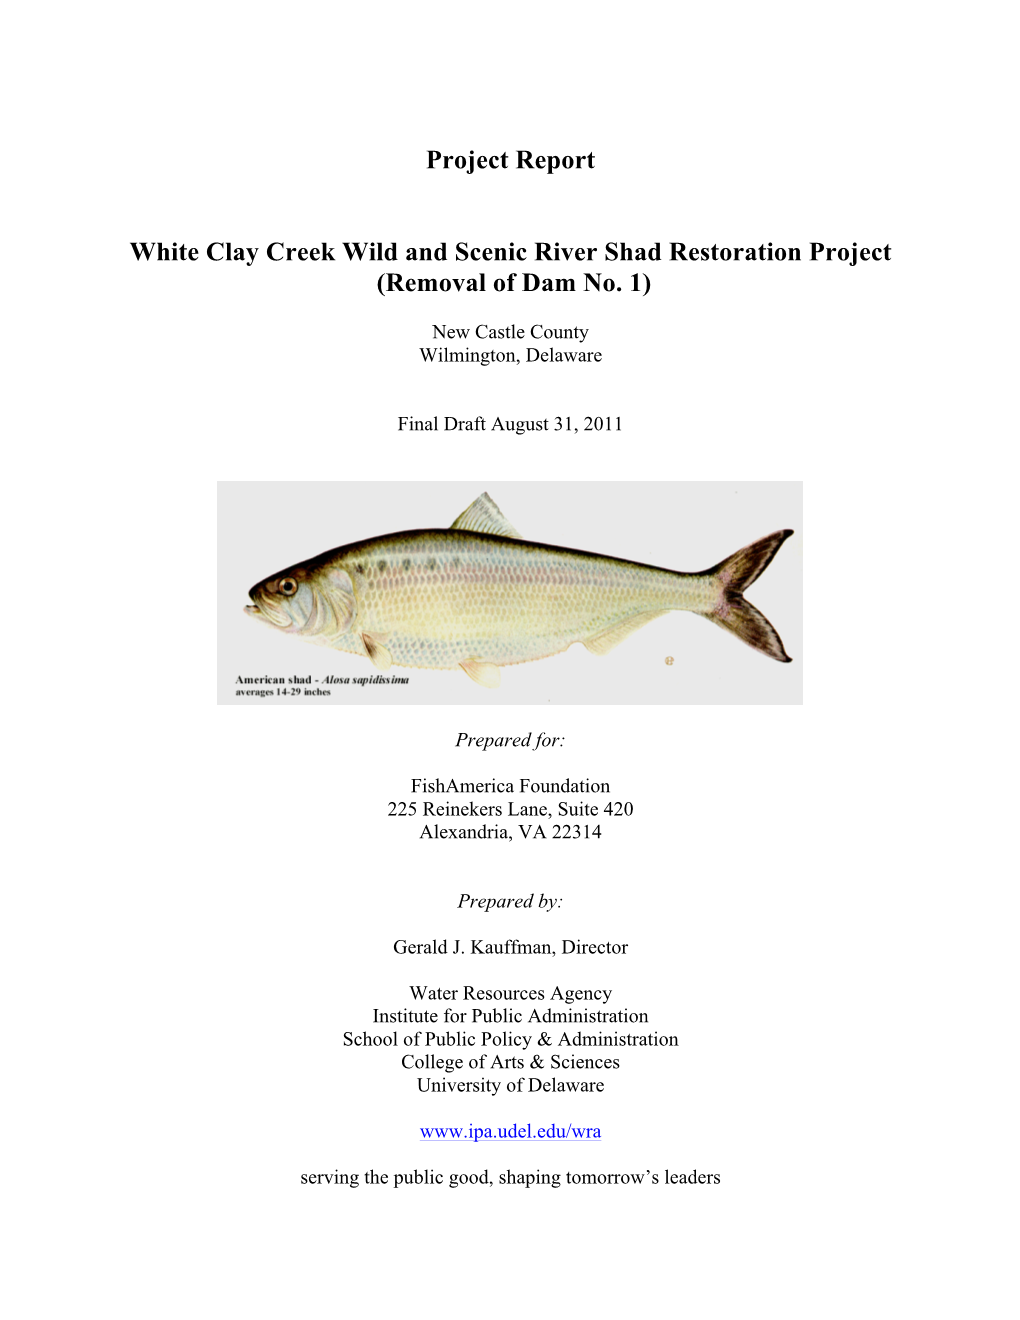 Project Report White Clay Creek Wild and Scenic River Shad Restoration